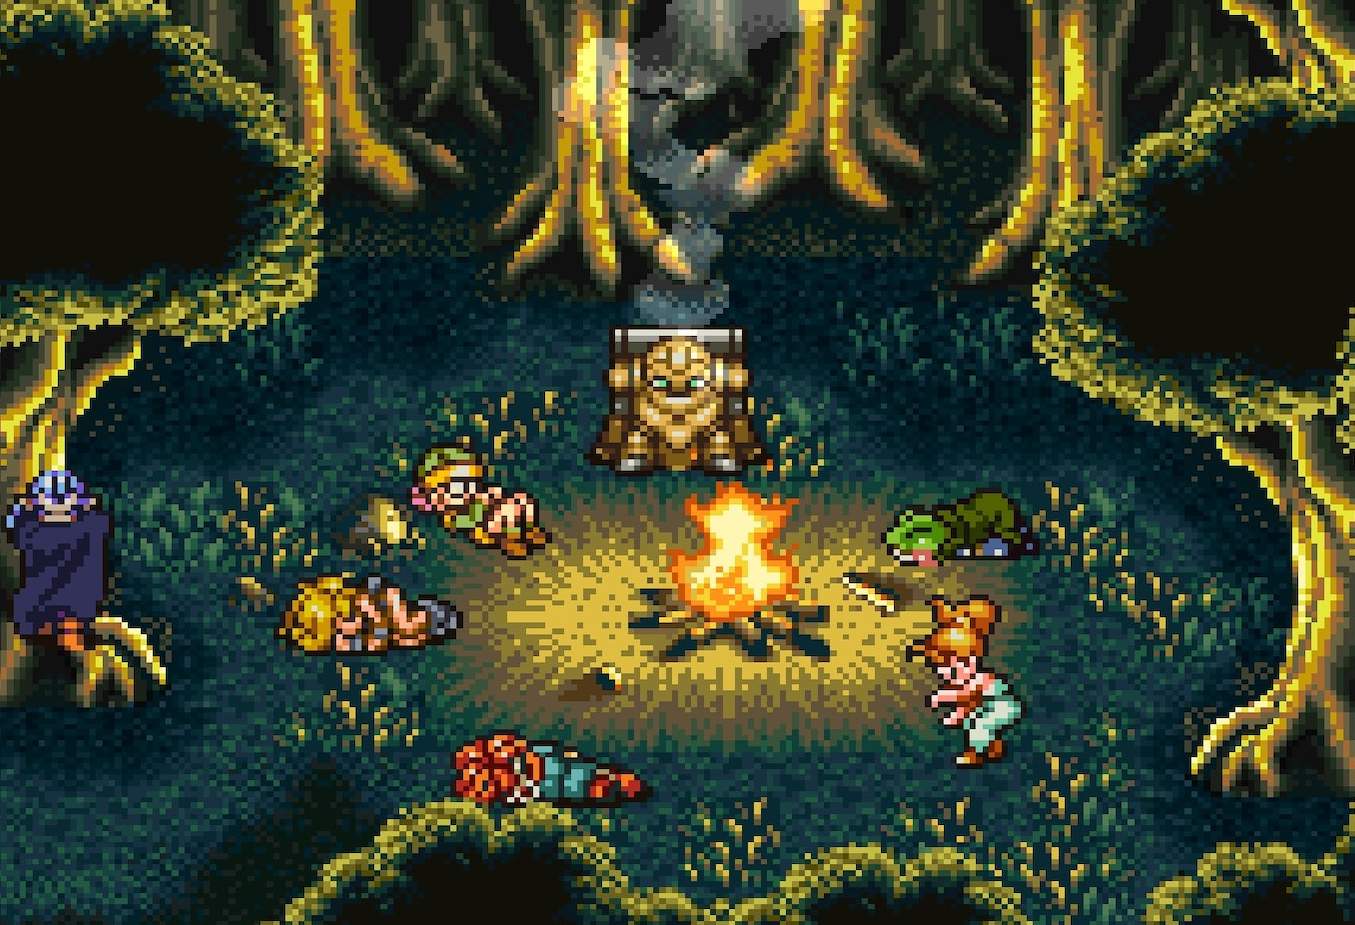 chrono trigger tower of the ancients